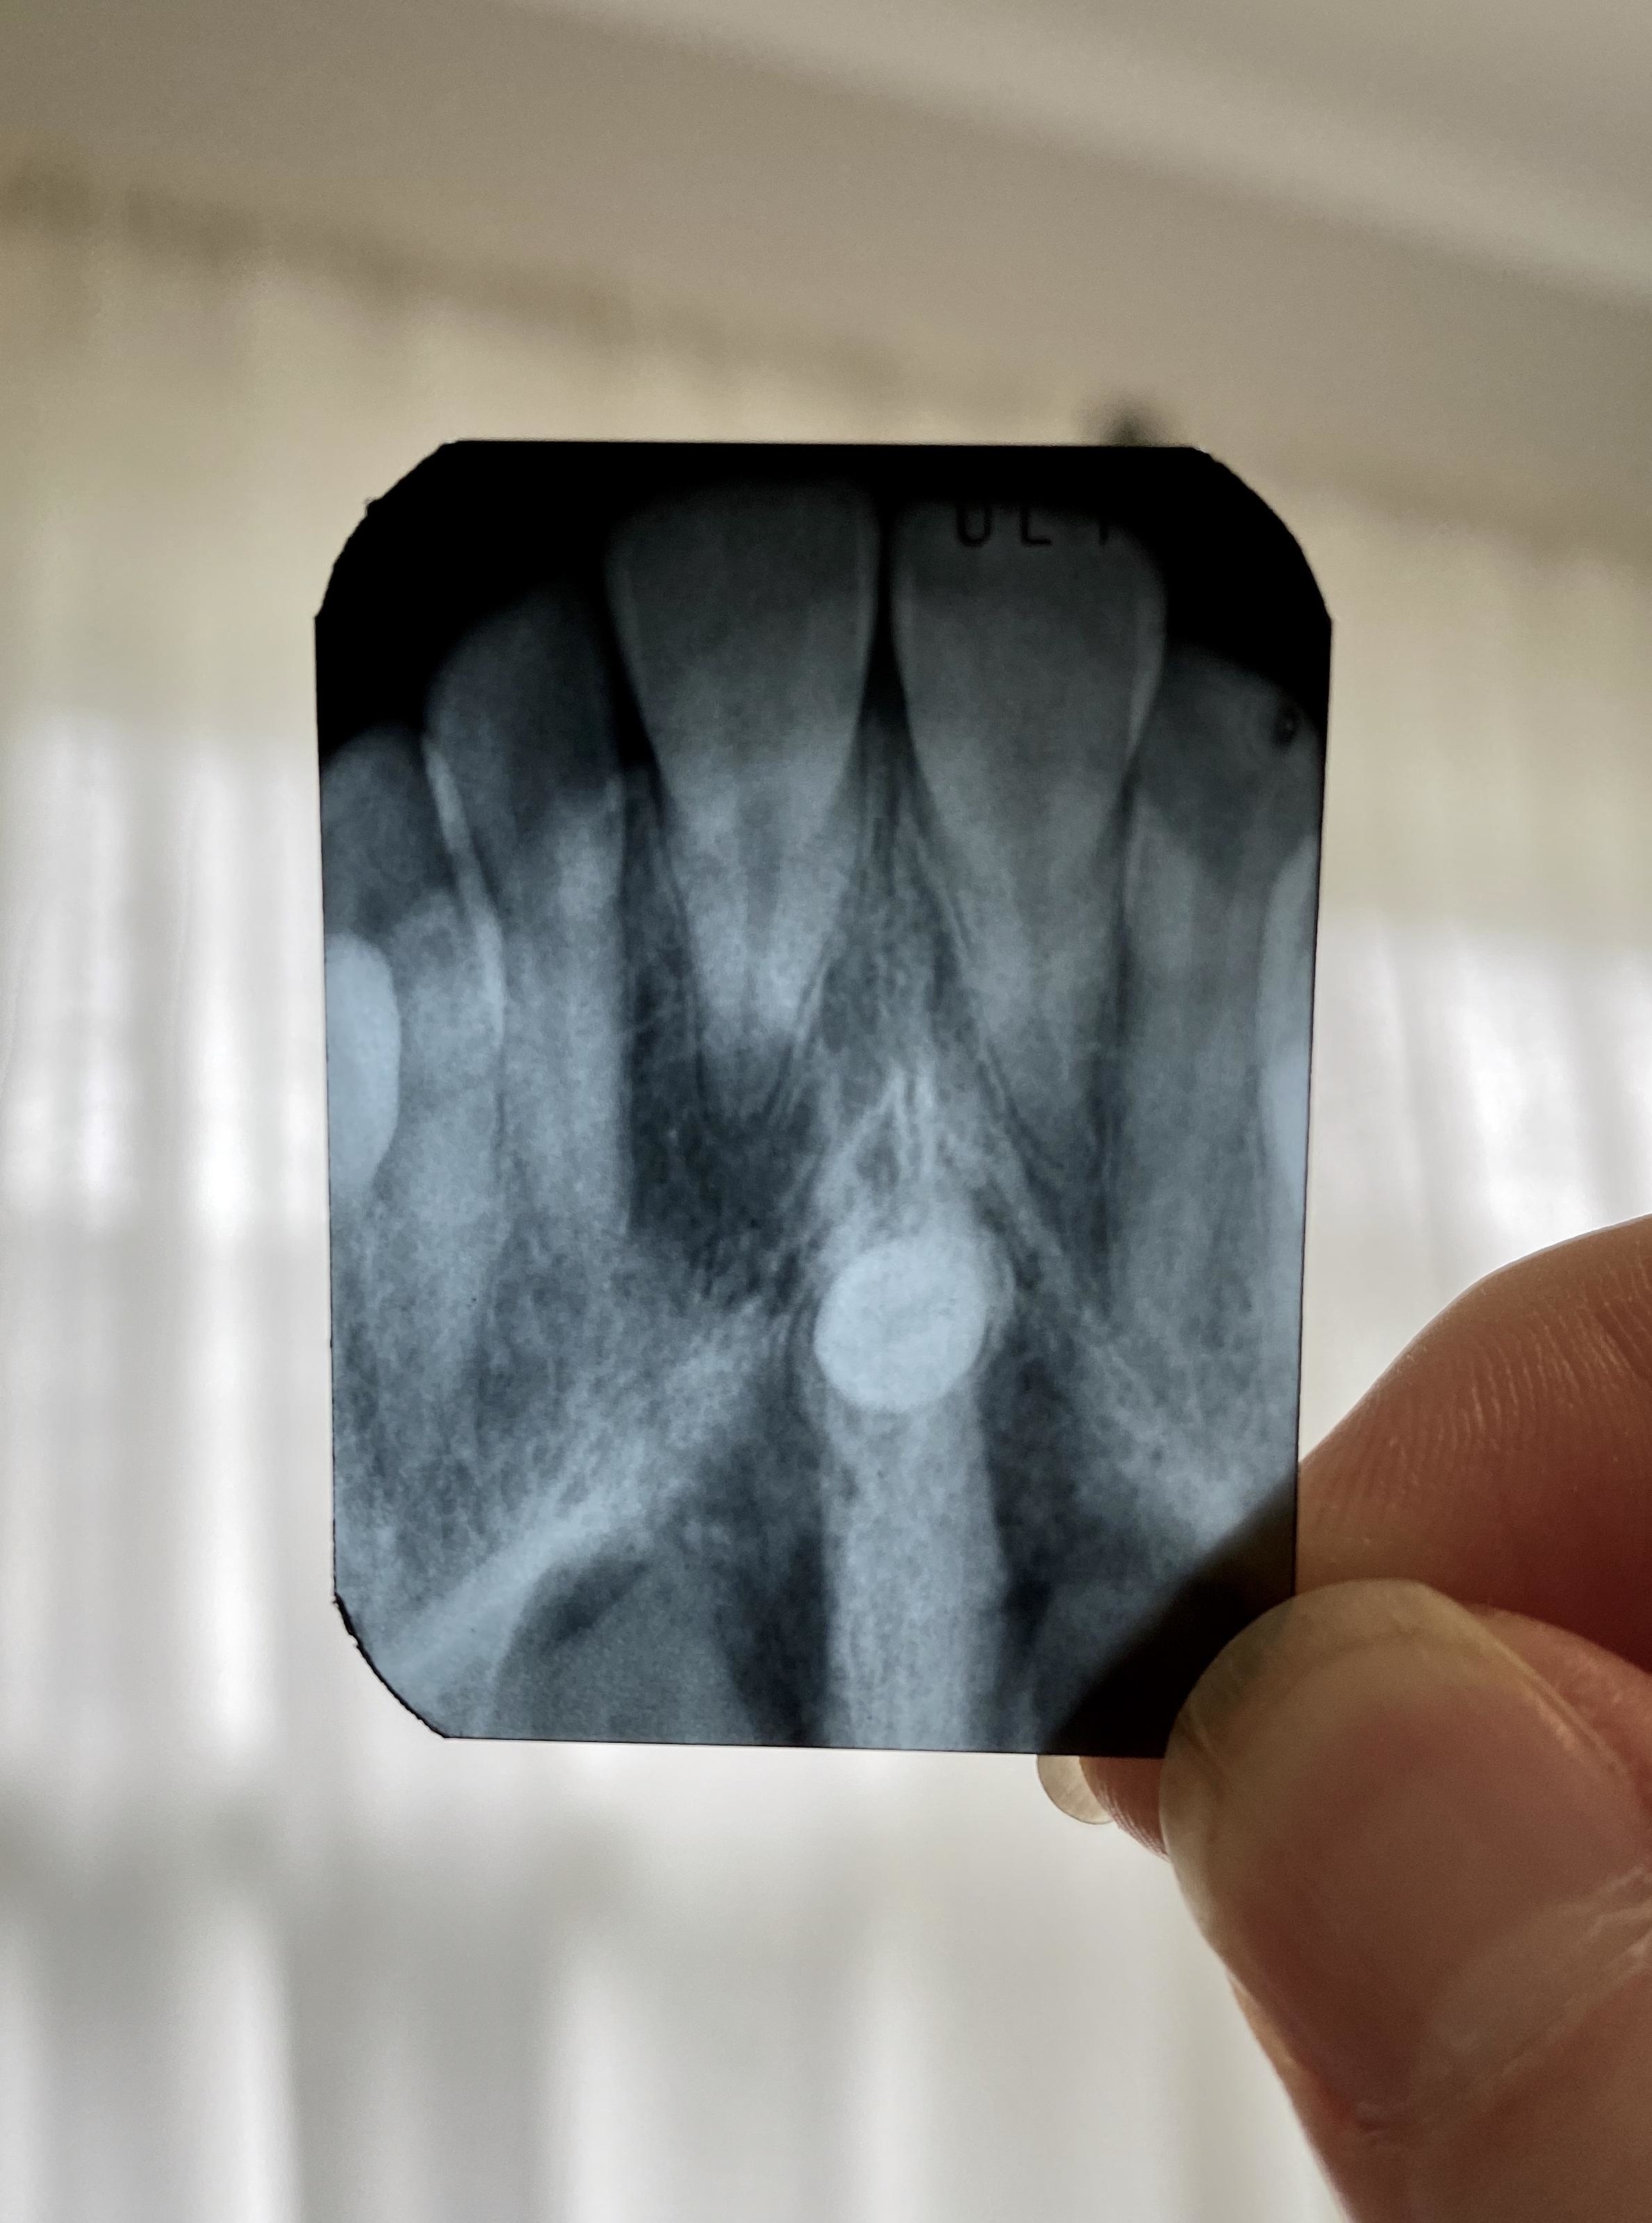 An X-ray of a tooth